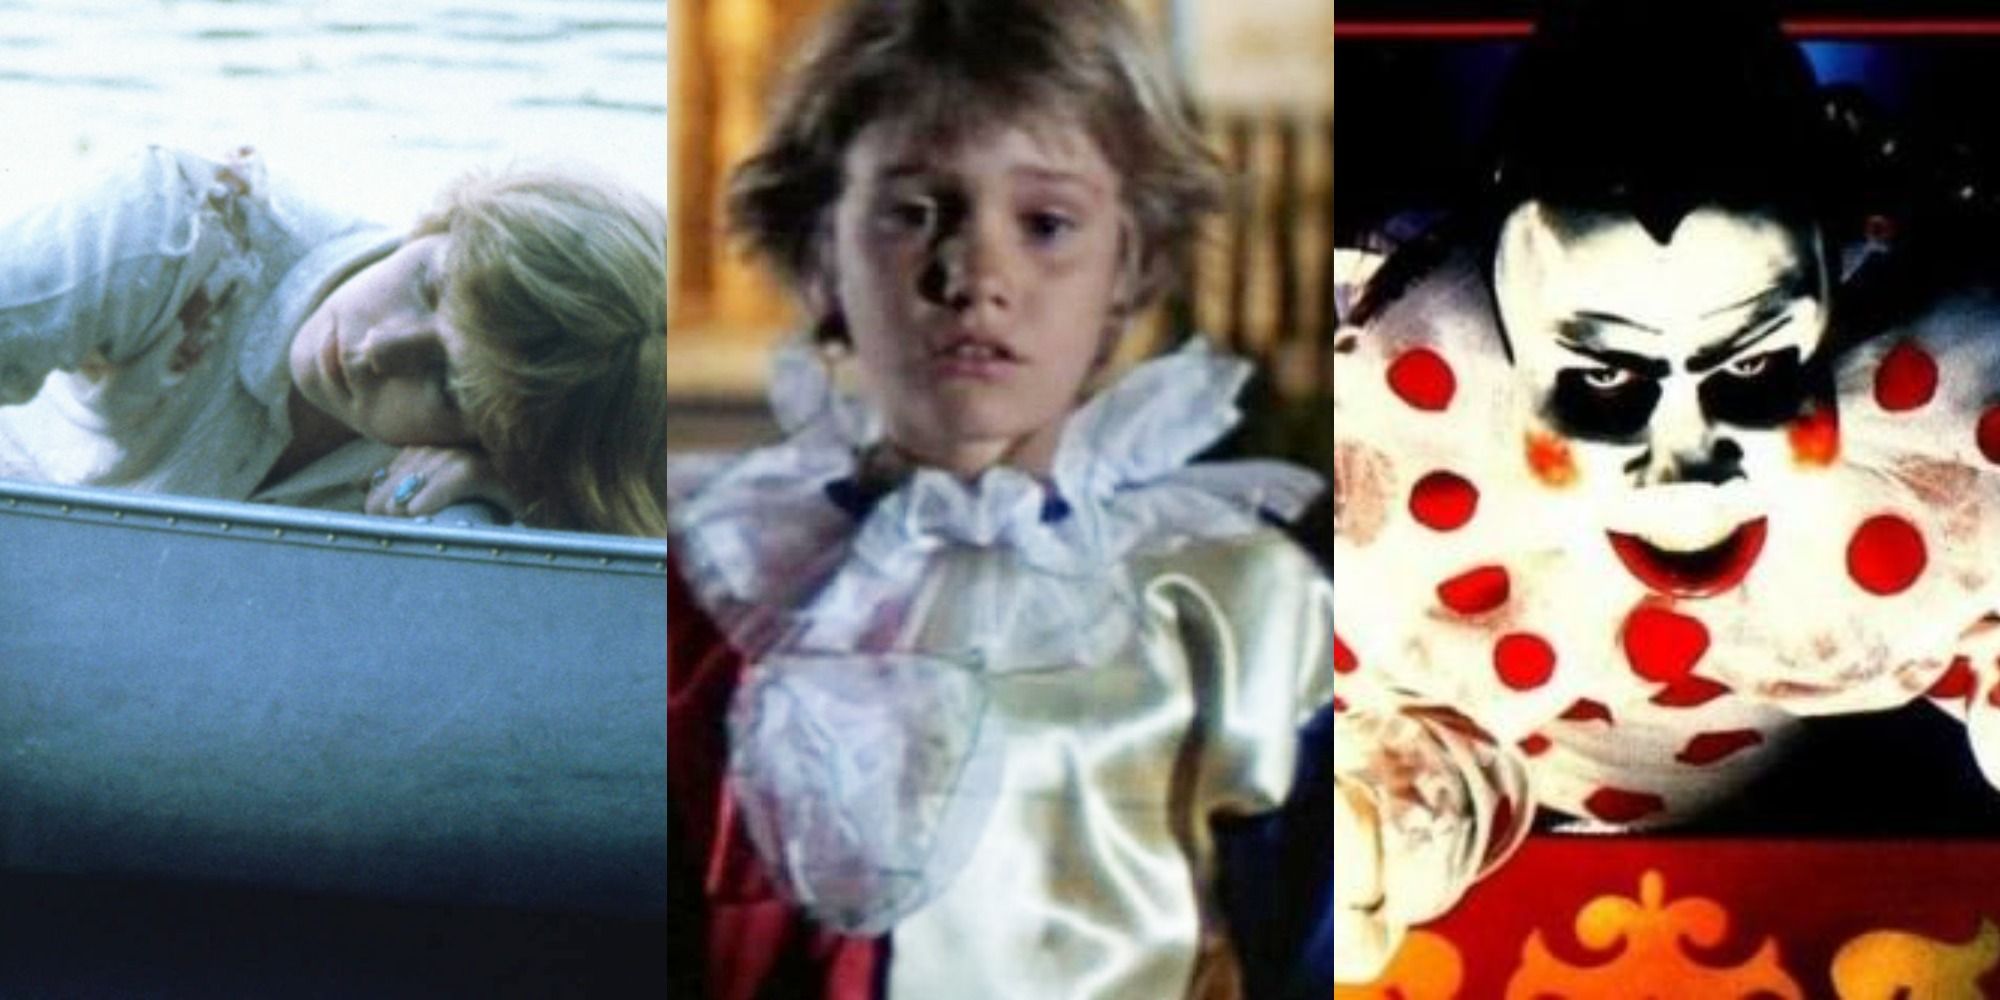 Triple image of Alice in boat Friday the 13th, young Michael Myers, Funhouse clown poster